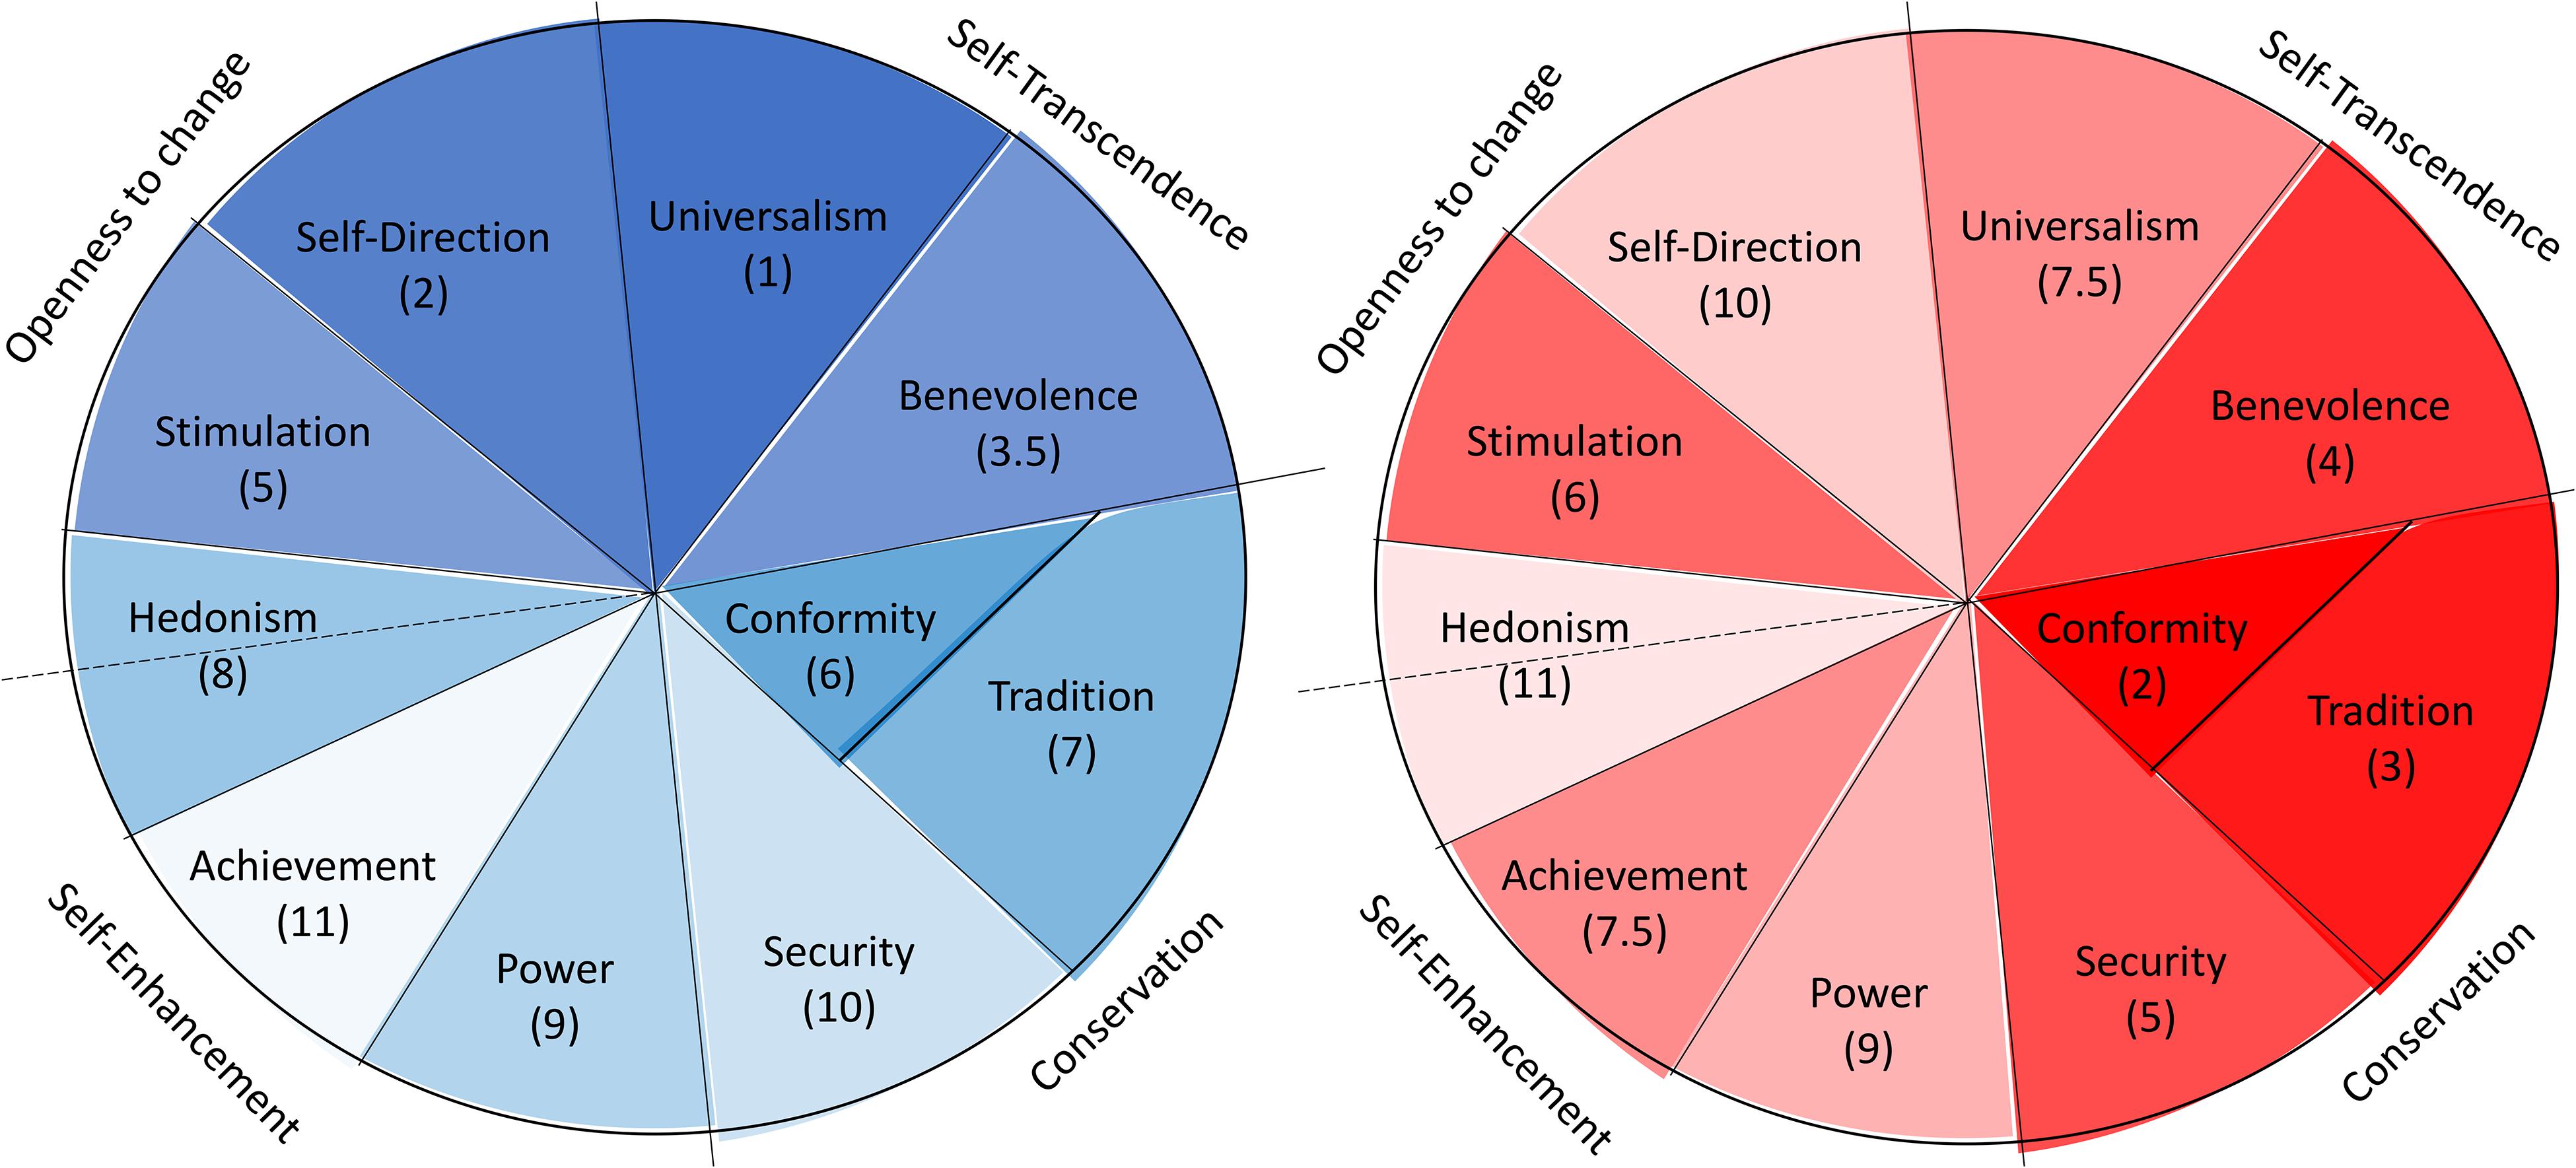 Figure 1. Depiction of culture-level value dimensions Alteration/Preservation (blue) and Amenability/Dominance (red).